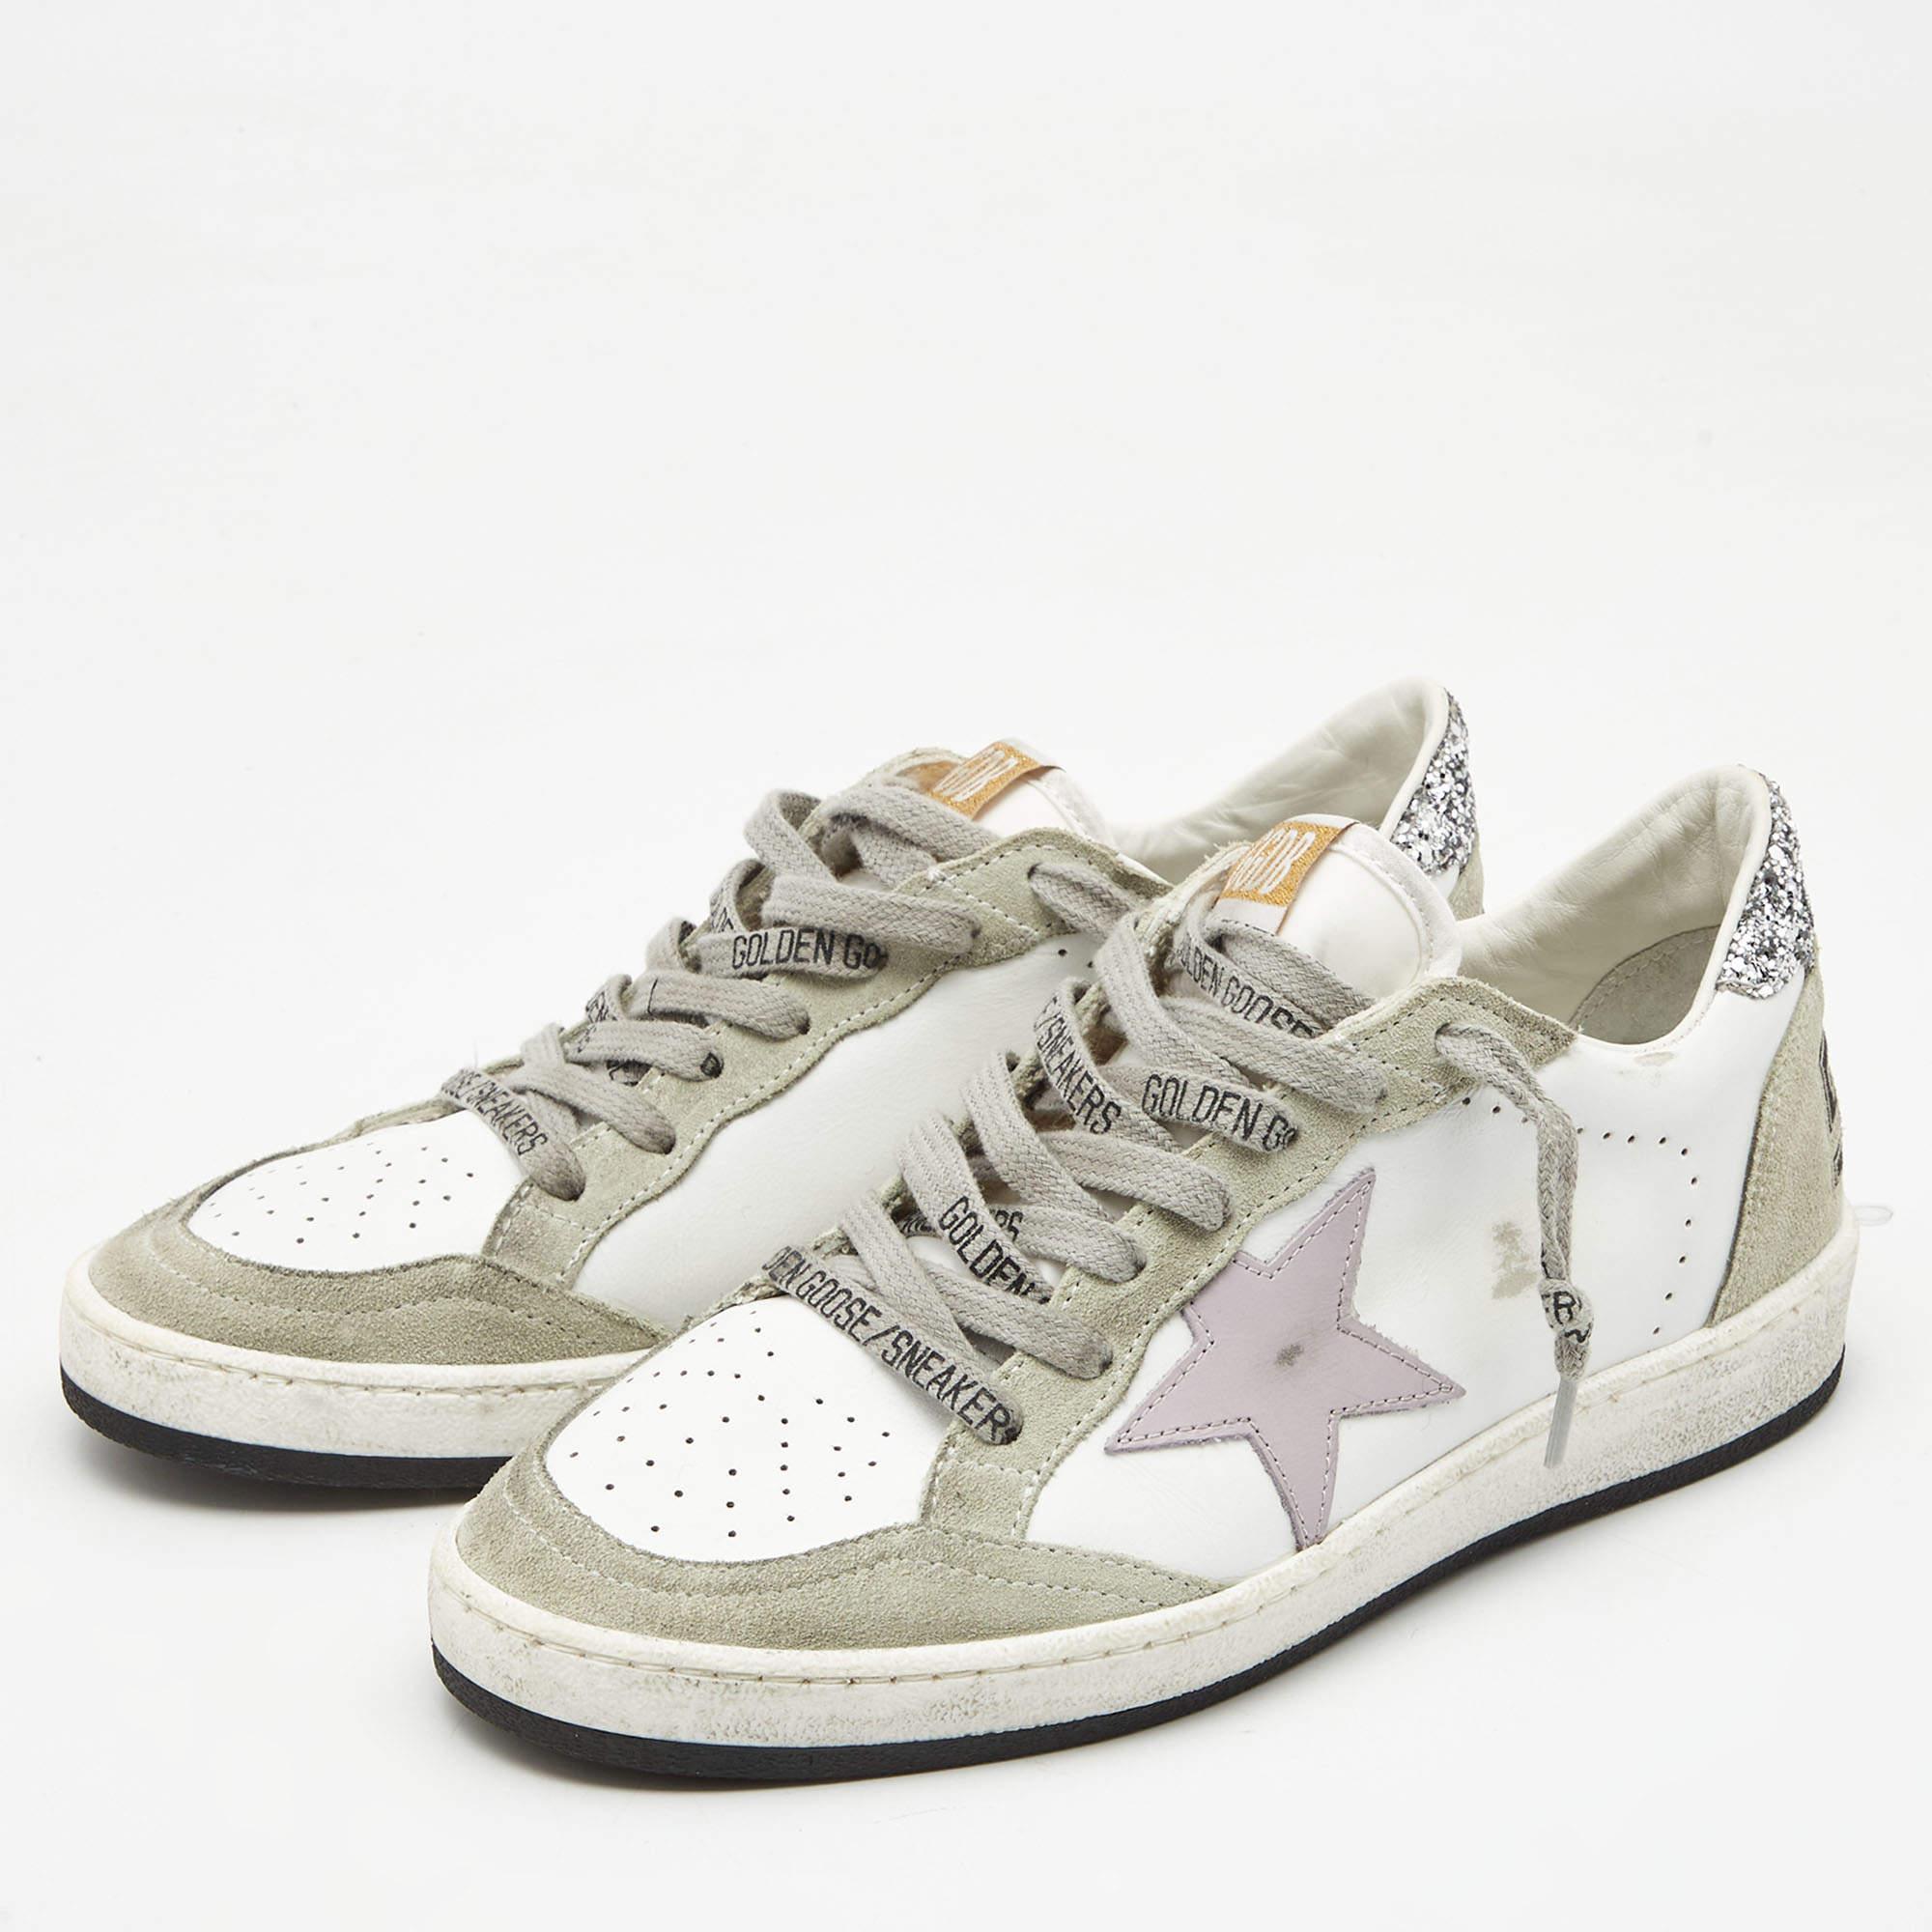 Women's Golden Goose White/Grey Leather and Suede Ballstar Low Top Sneakers Size 37